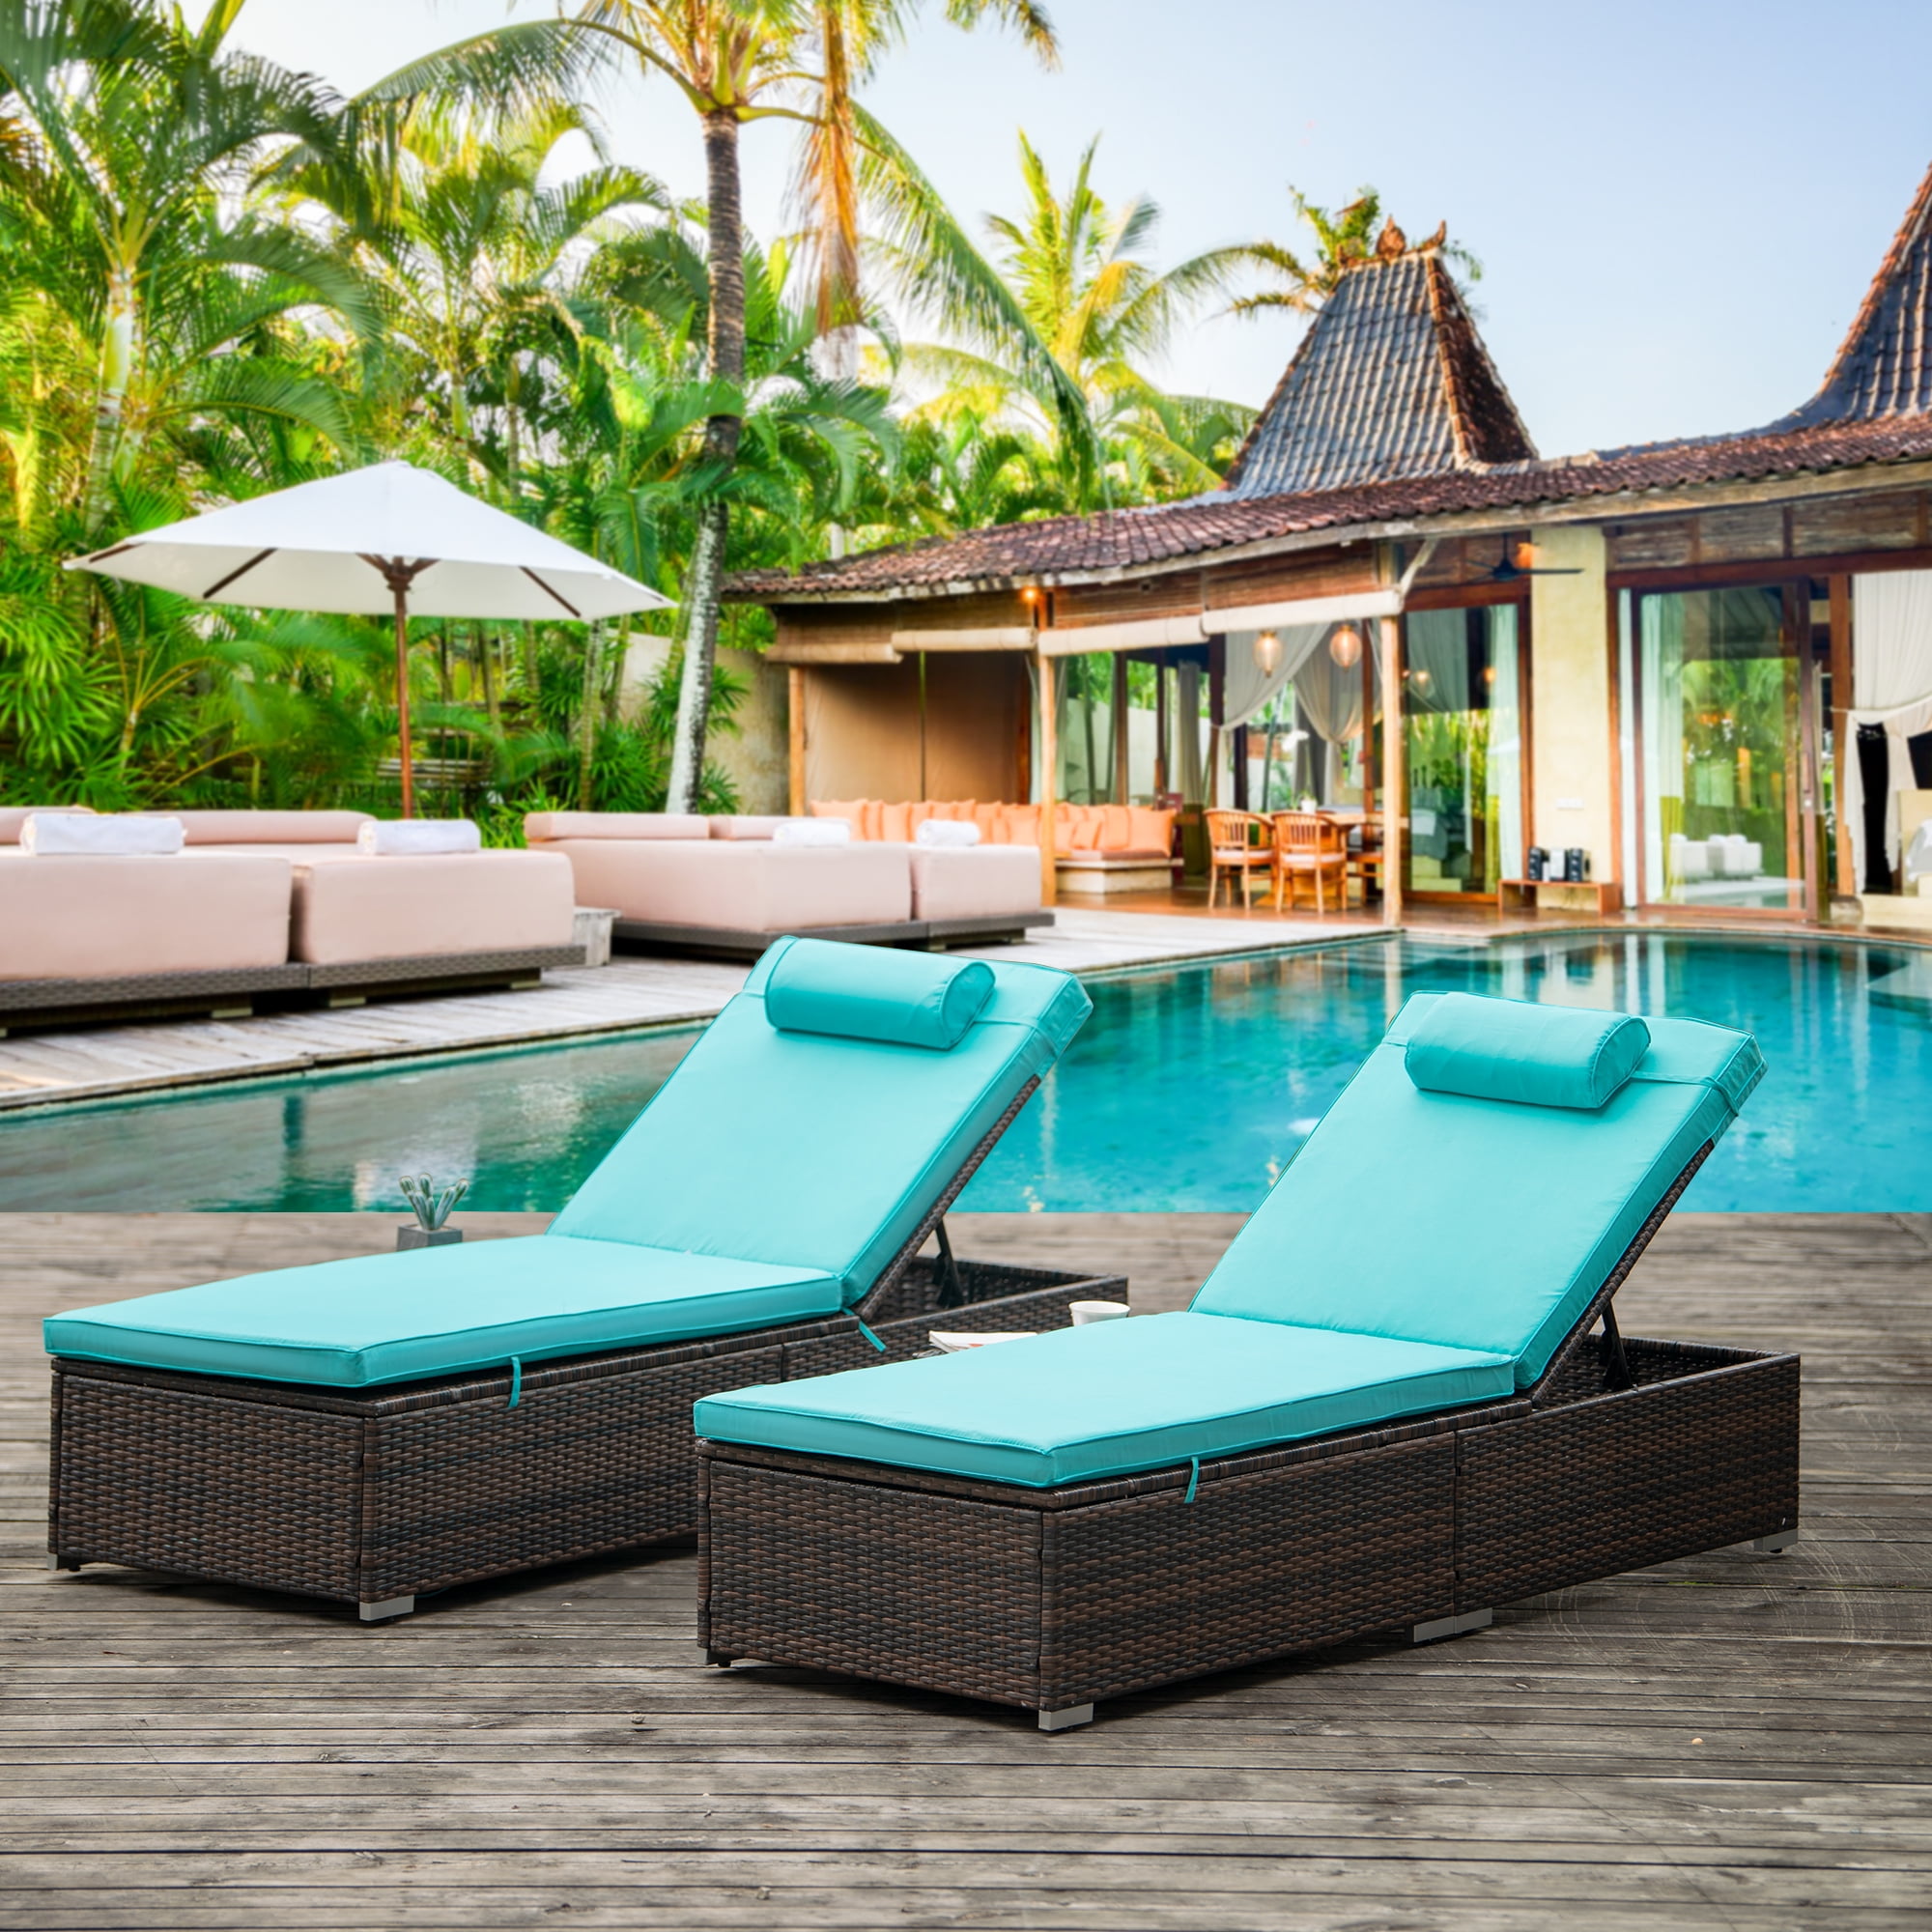 Swimming Pool Chair for Outdoor Lounging by the Pool